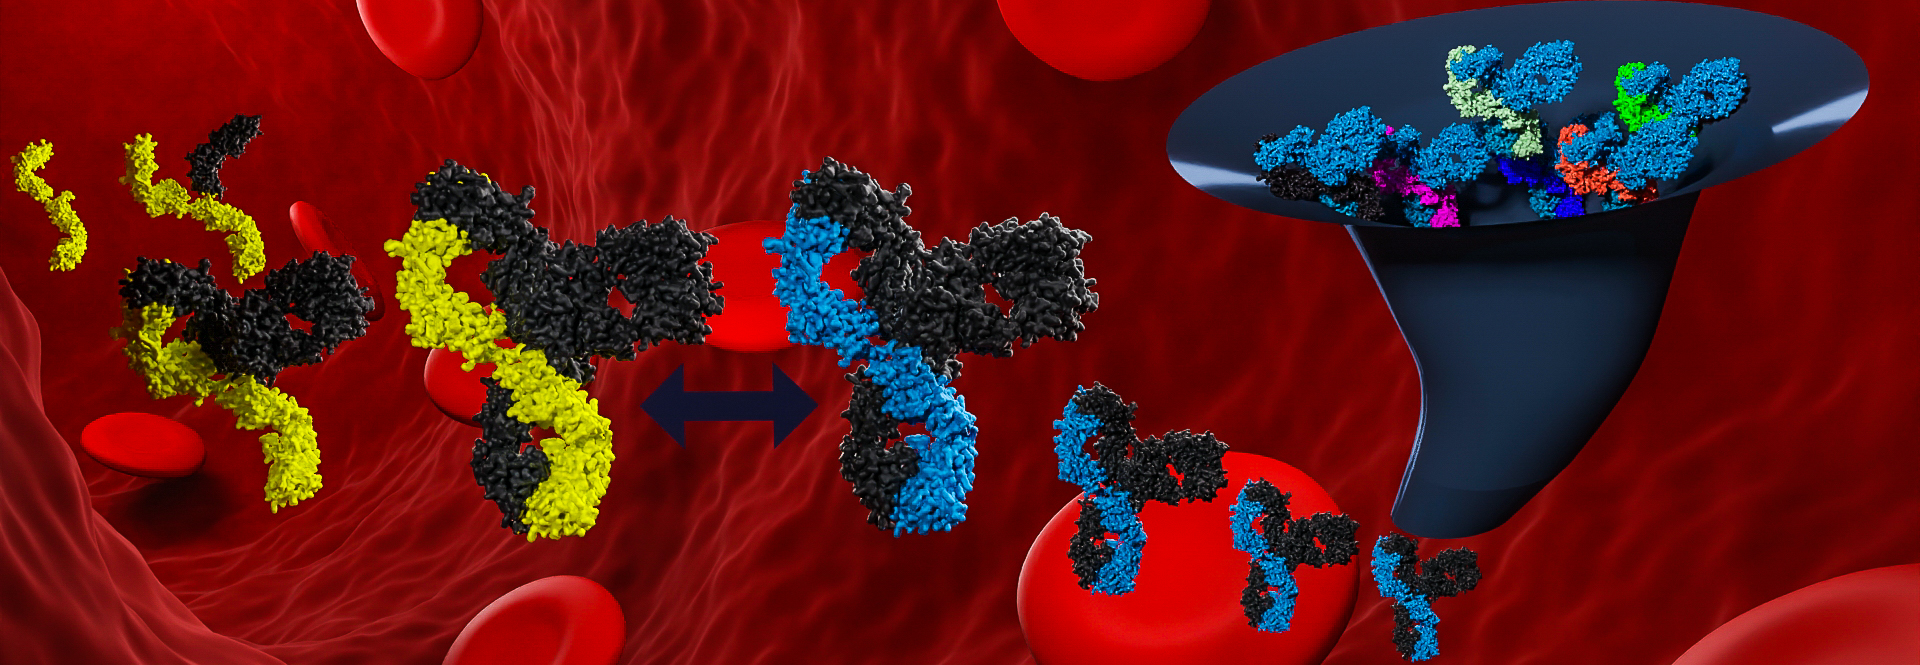 Comprehensive studies. 3d render of igG antibodies falling throug a funnel and getting degradated in a red blood vessel scene generated by Biofidus AG